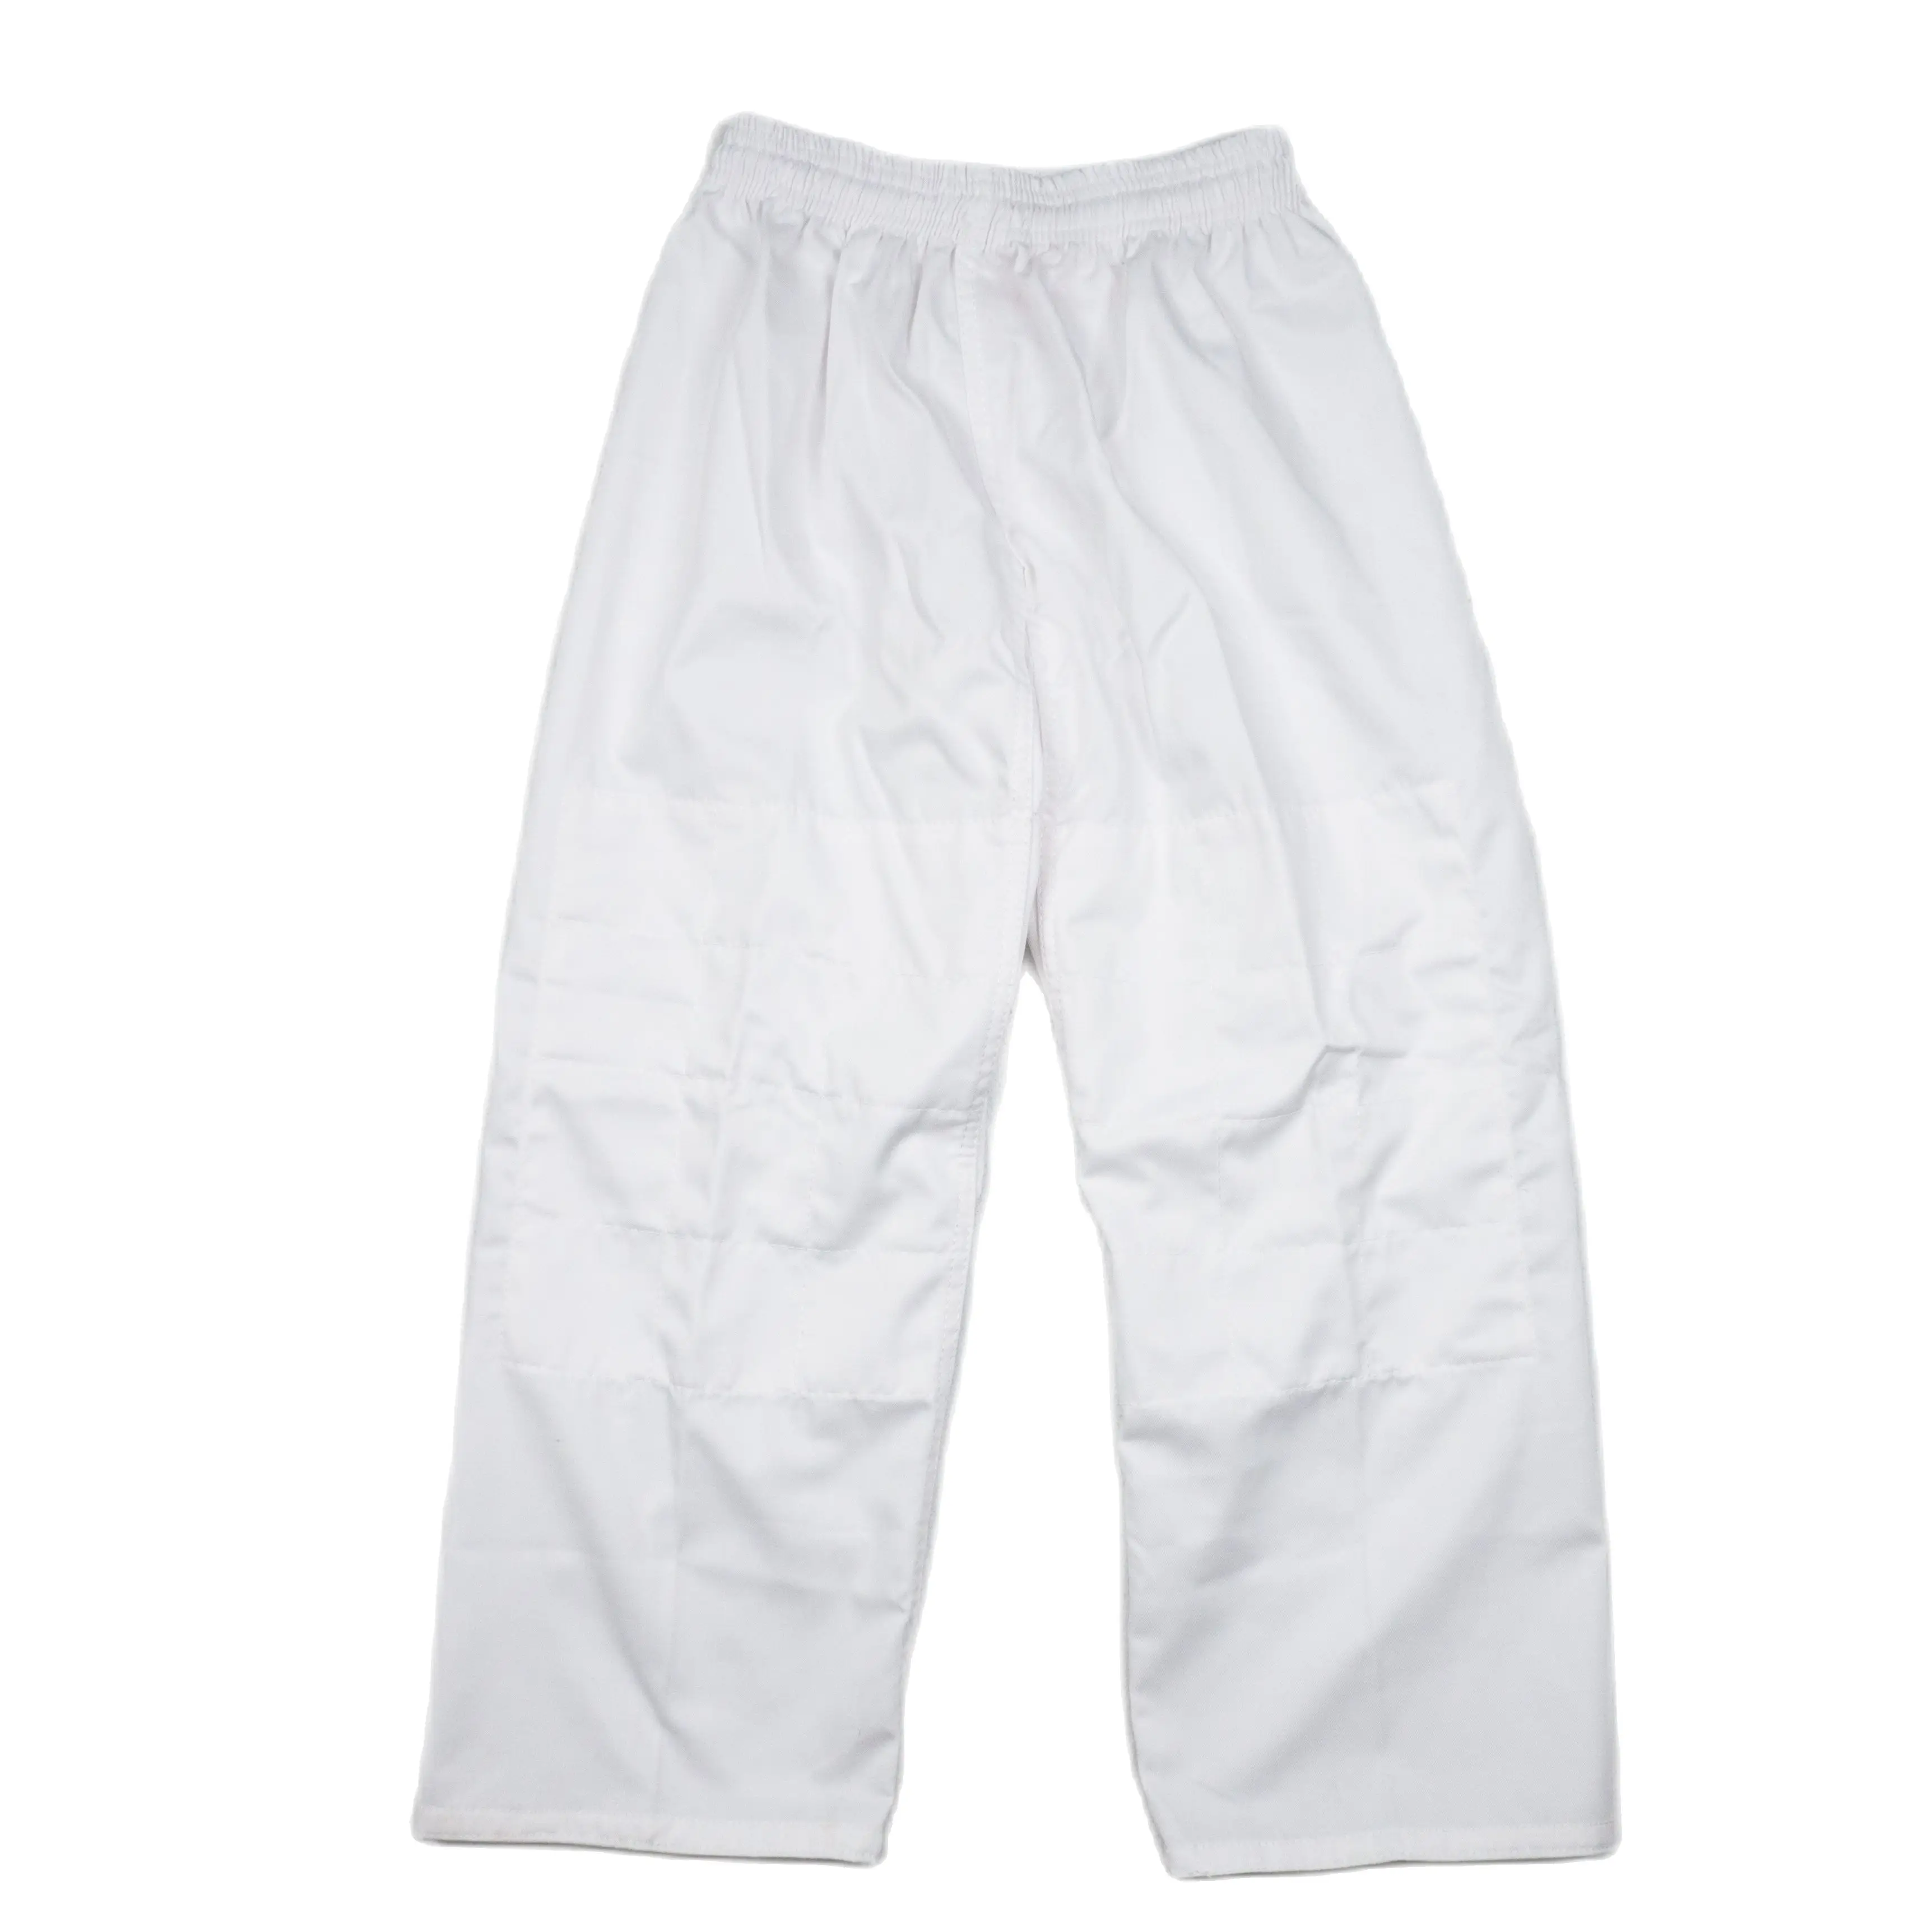 Kids Adults Judo Trousers Pants 100% Cotton 9oz White Aikido Judo Gi Suit White And Blue